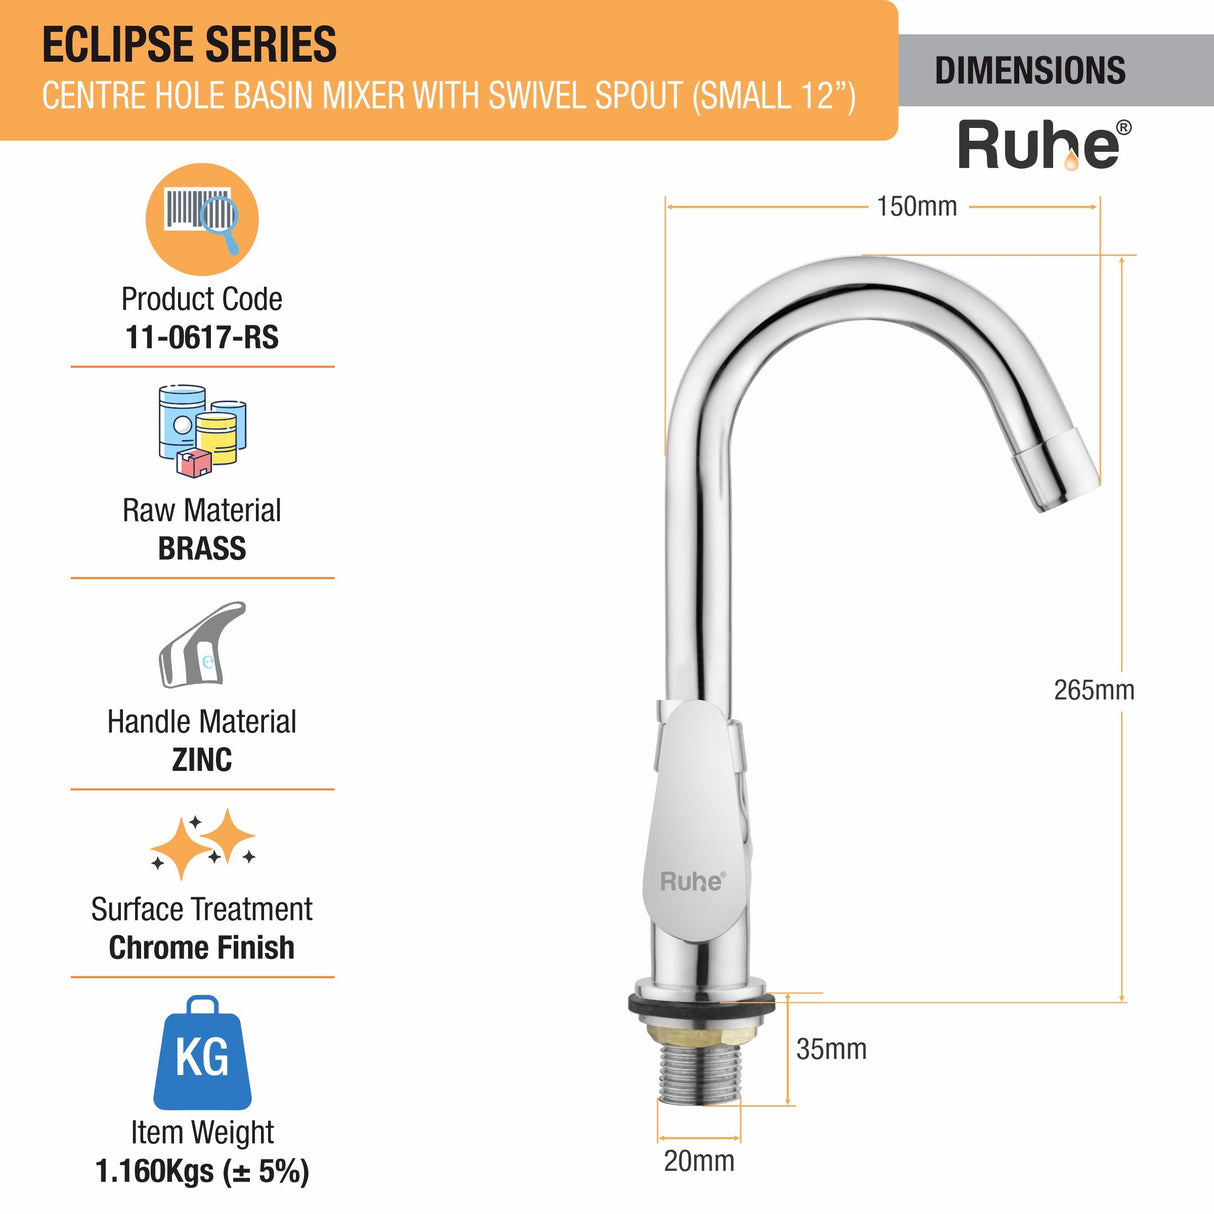 Eclipse Centre Hole Basin Mixer with Small (12 inches) Round Swivel Spout Faucet dimensions and size